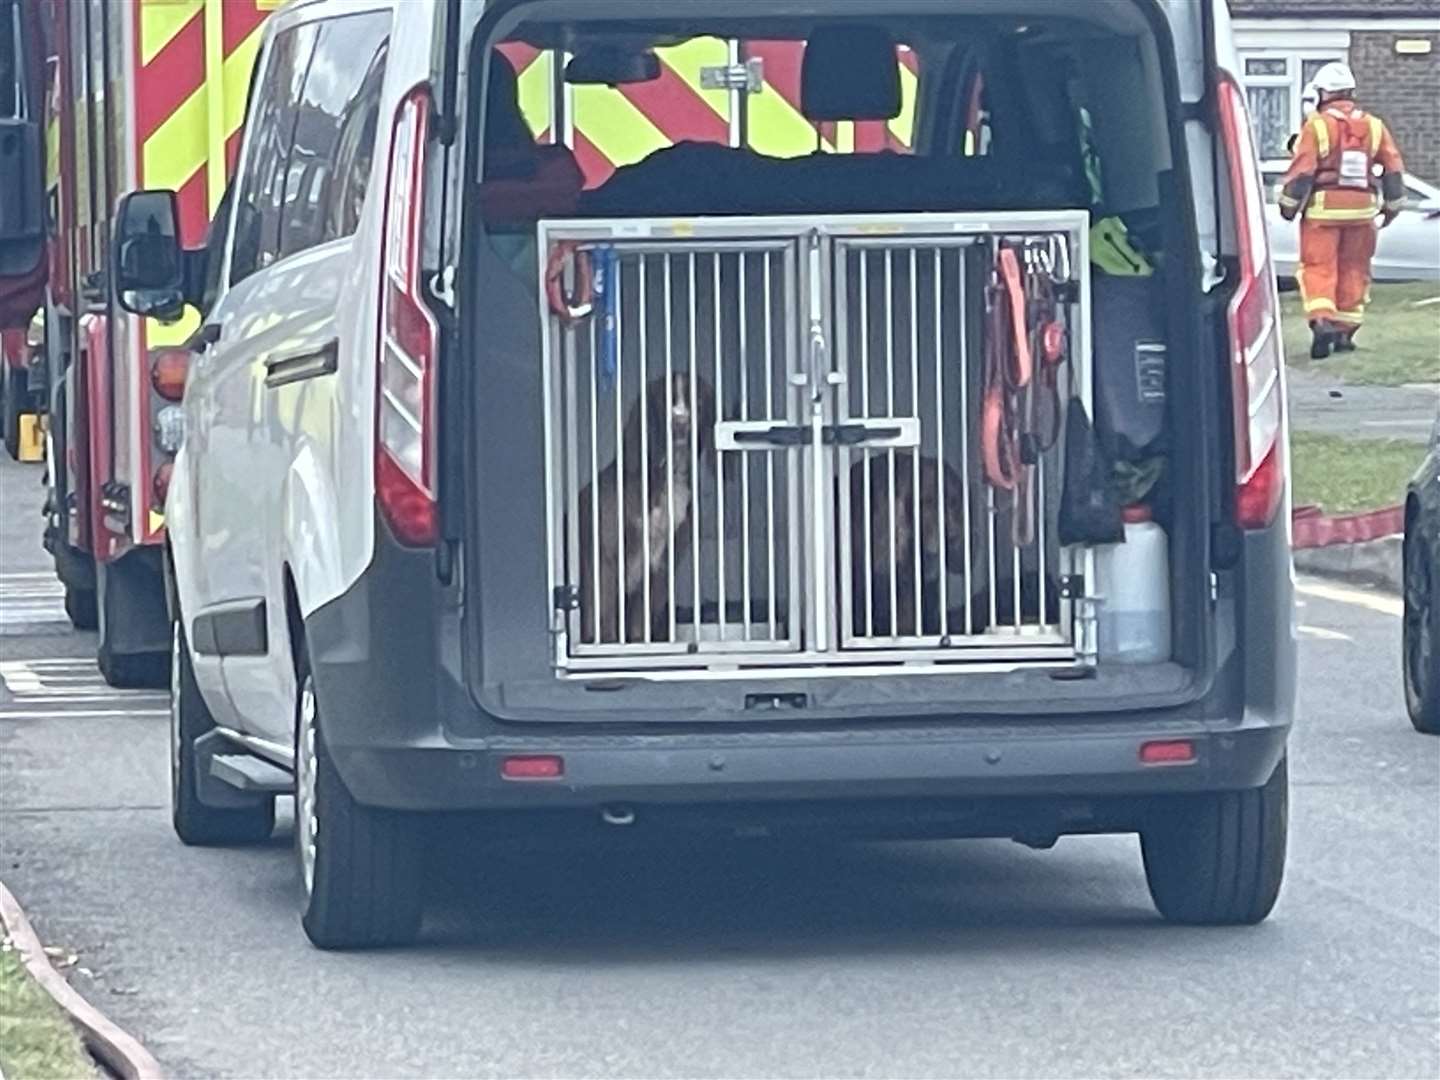 Police sniffer dogs brought in to help with the search